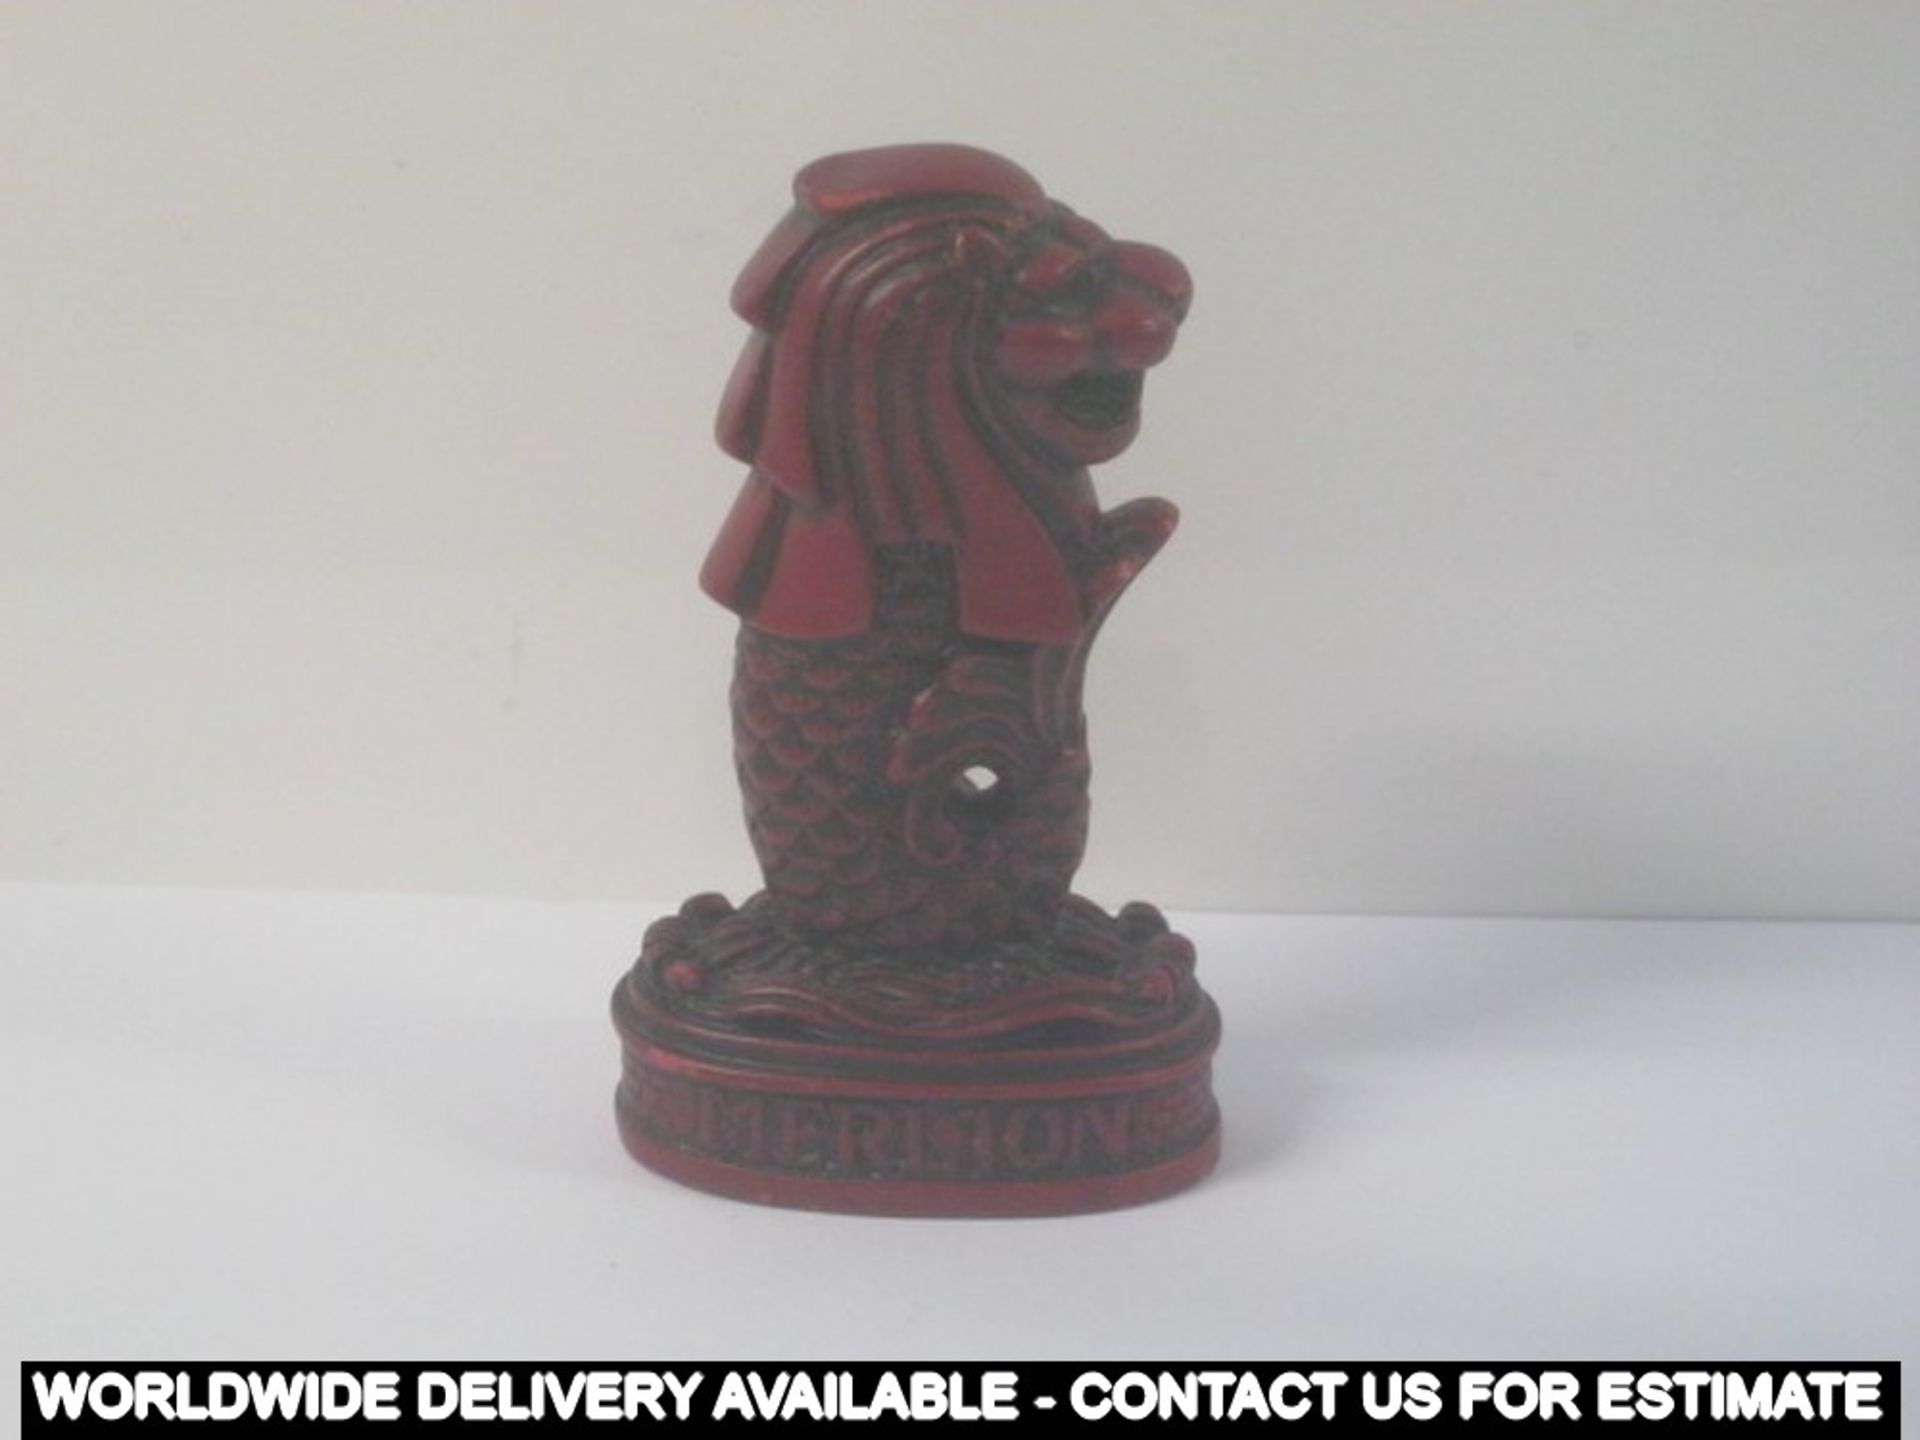 2 x red resin dragons - one marked SINGAPORE and MERLION - Image 3 of 5